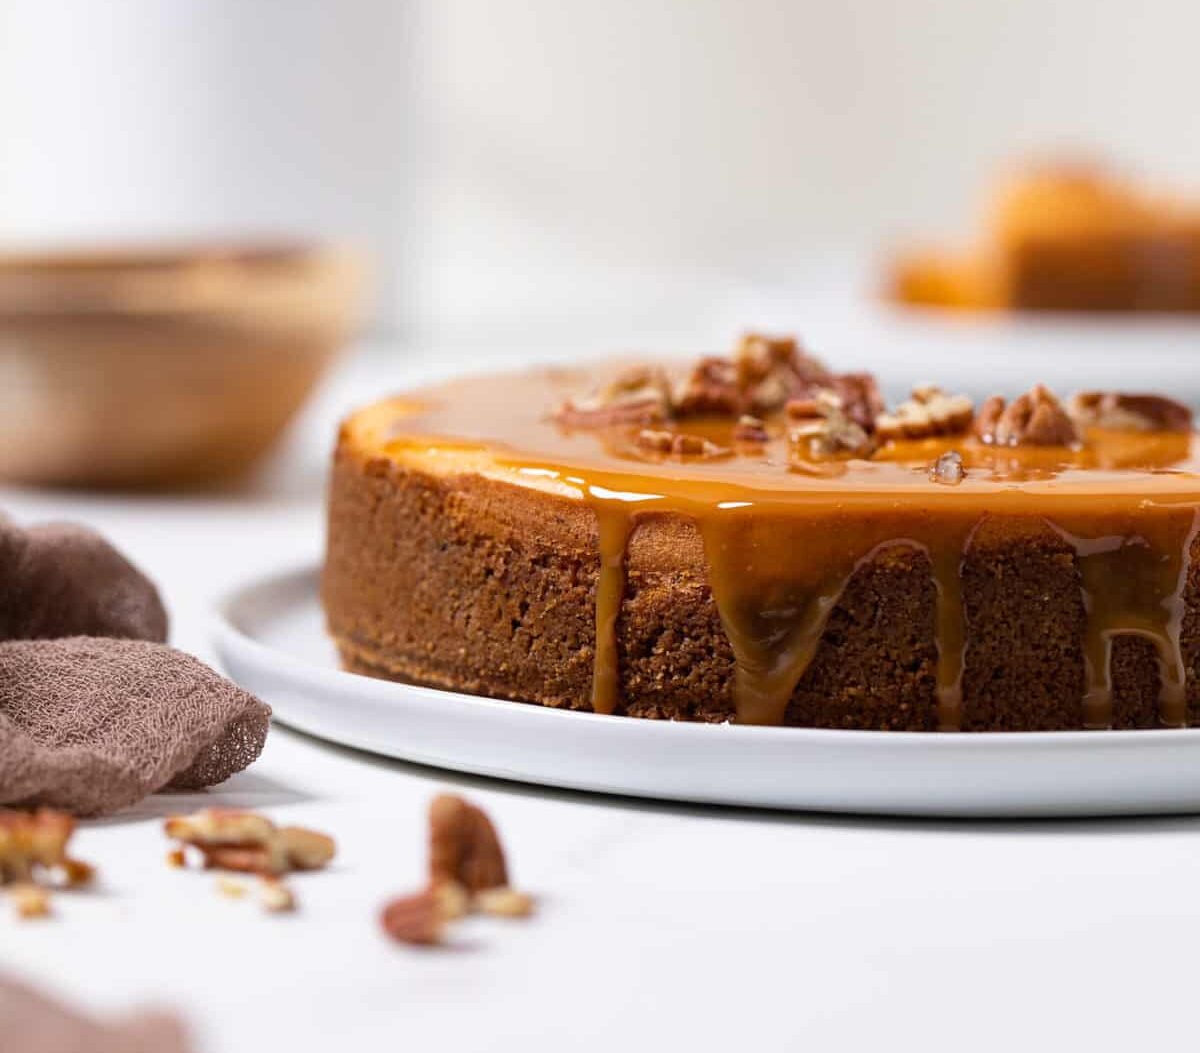 whole Sweet Potato Caramel Cheesecake on a white plate with nuts in the foreground